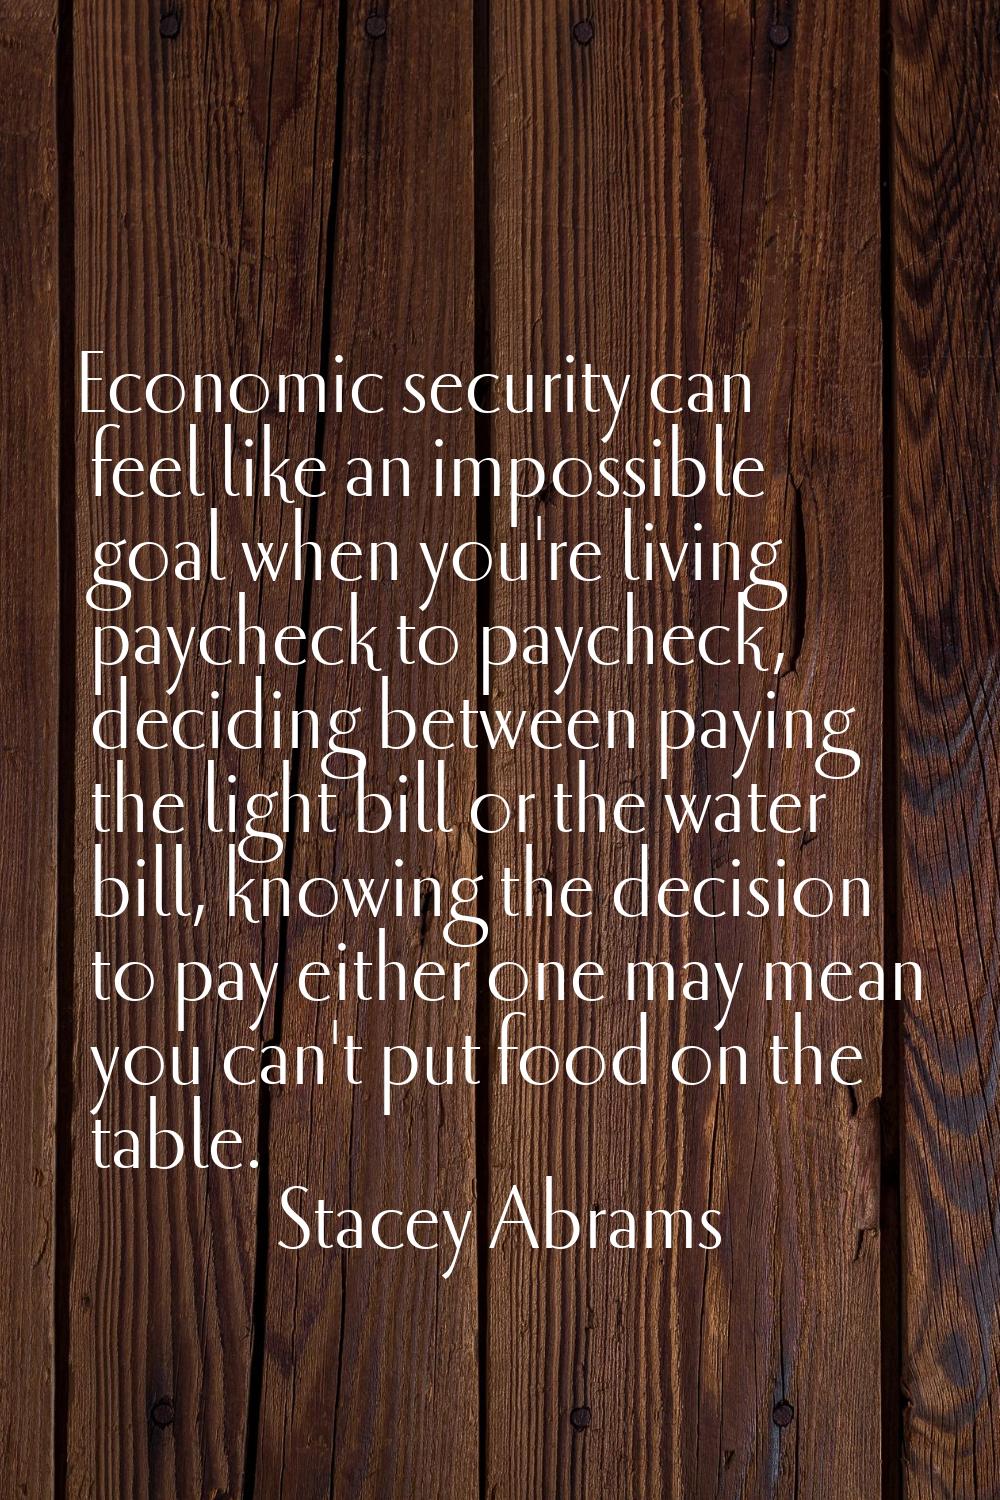 Economic security can feel like an impossible goal when you're living paycheck to paycheck, decidin